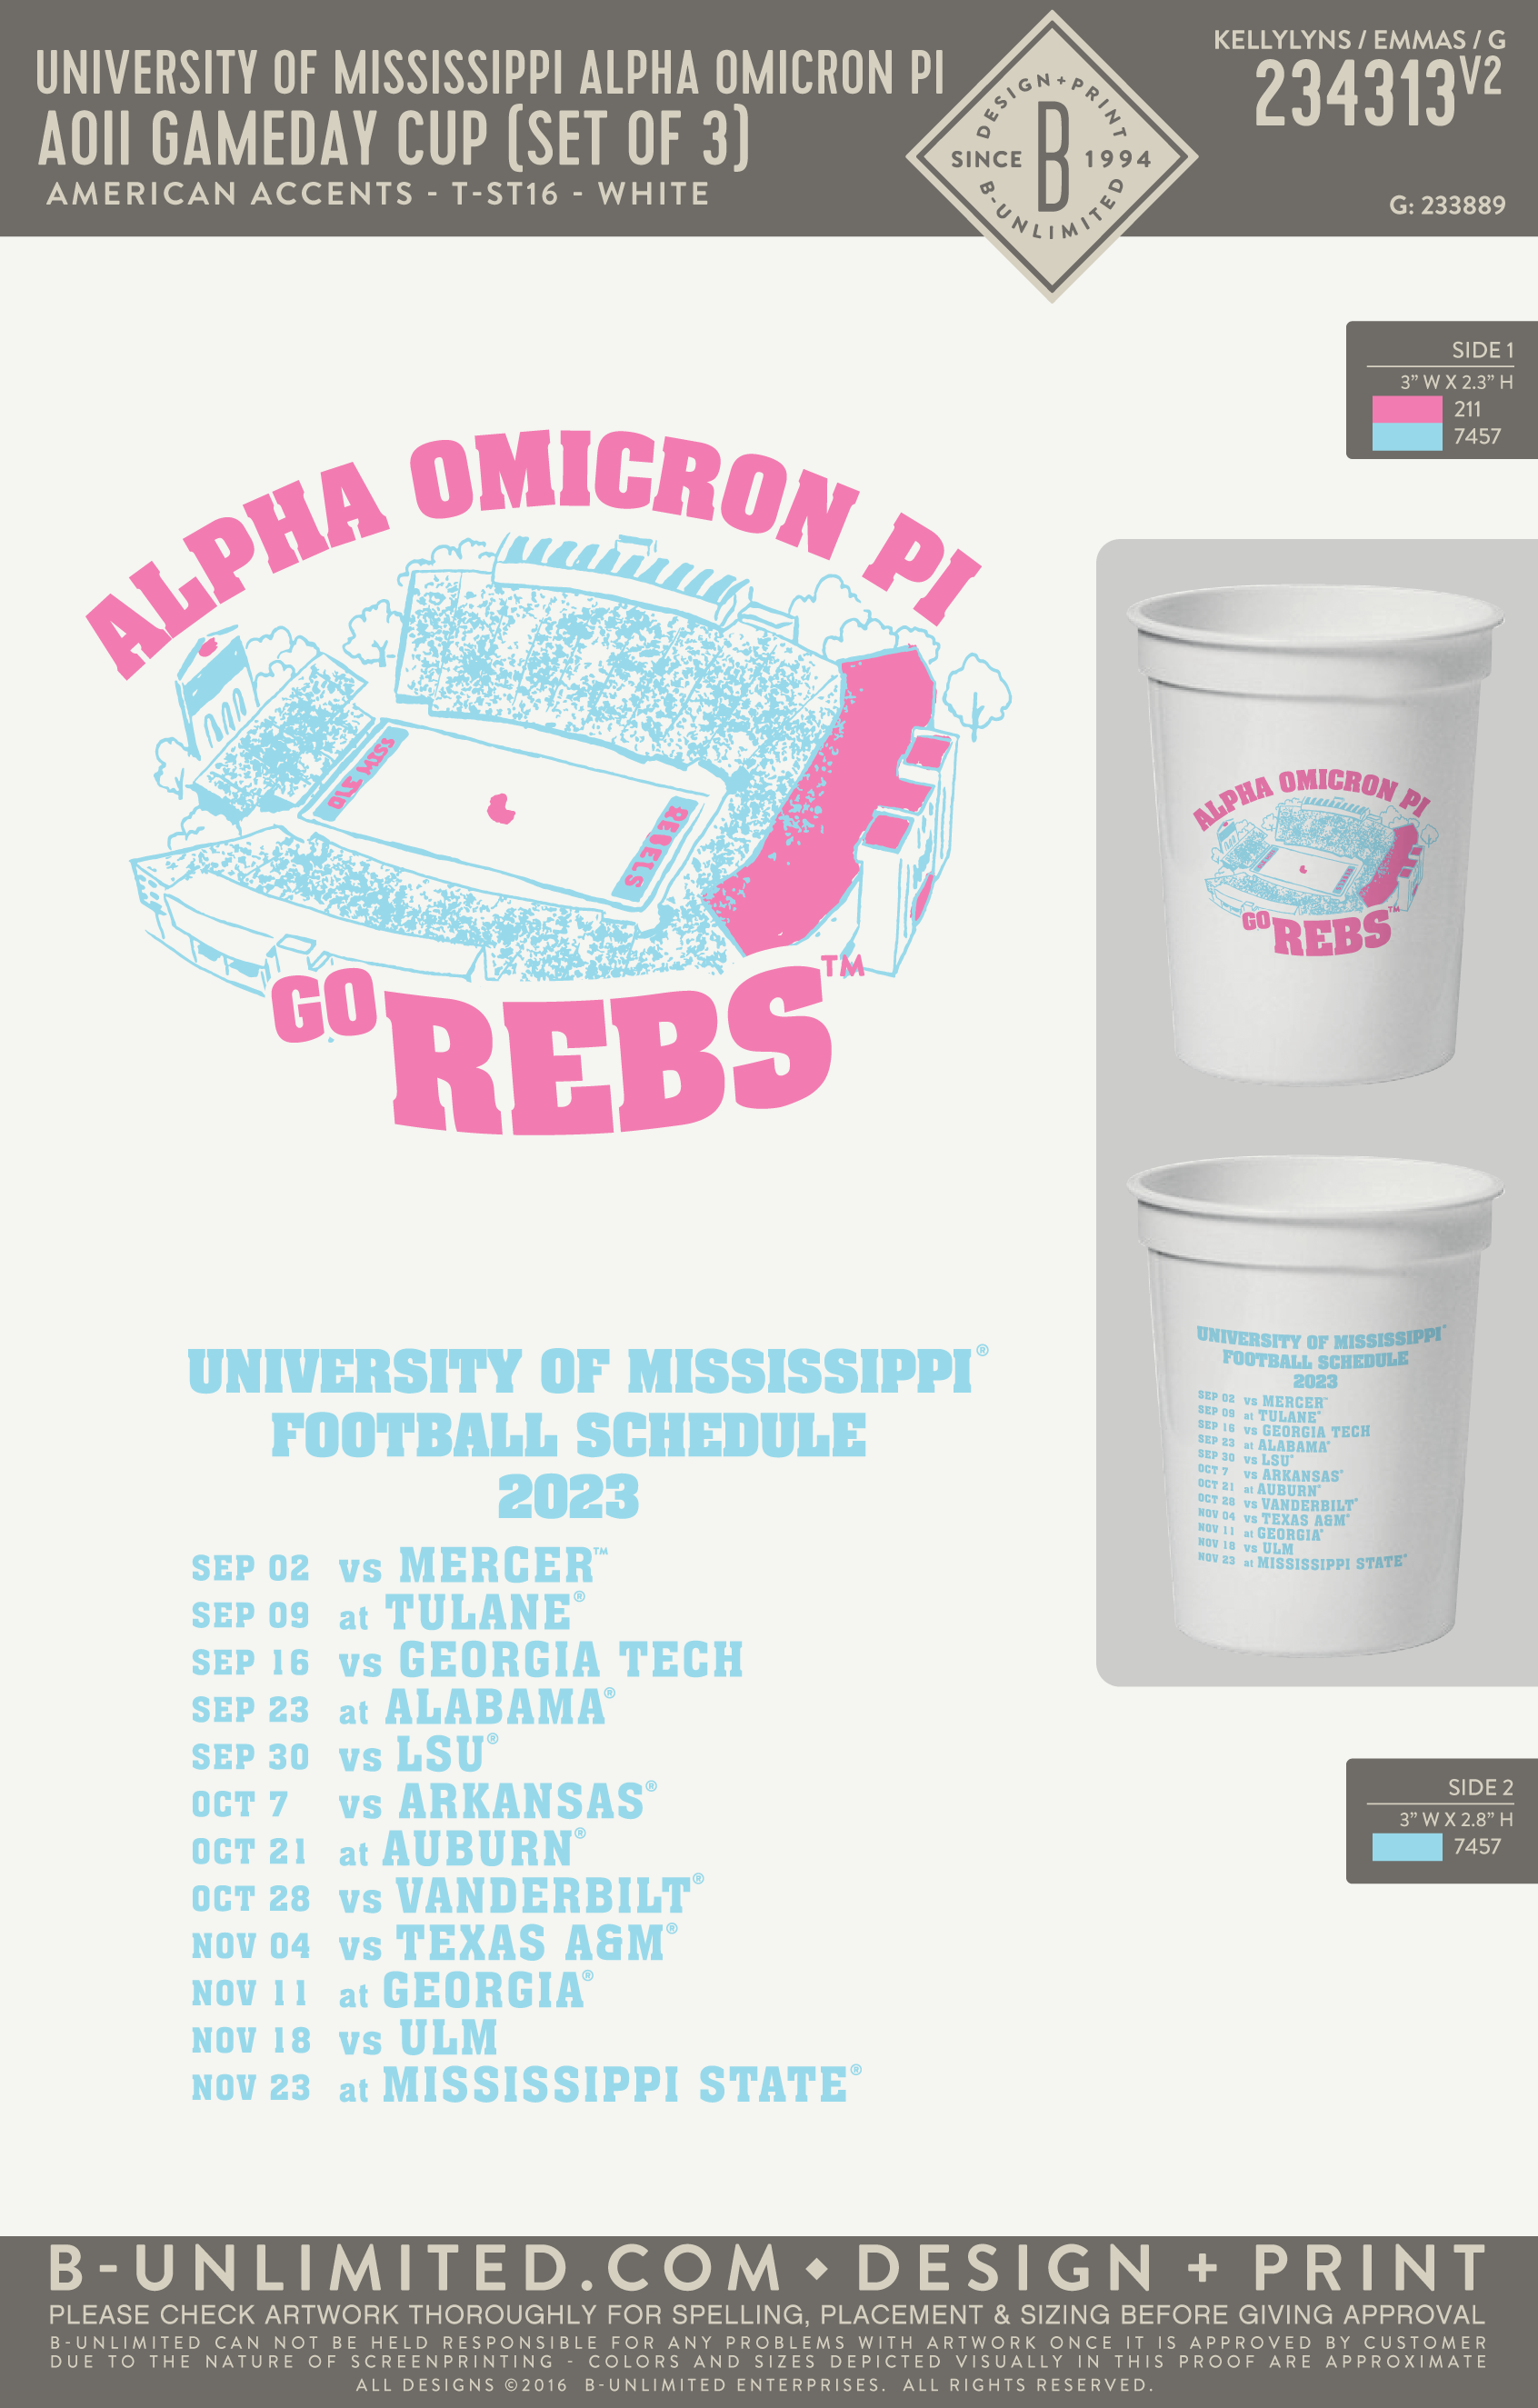 University of Mississippi Alpha Omicron Pi - AOII Gameday Cup (Set of 3) - American Accents - T-ST16 - Stadium Cup - White